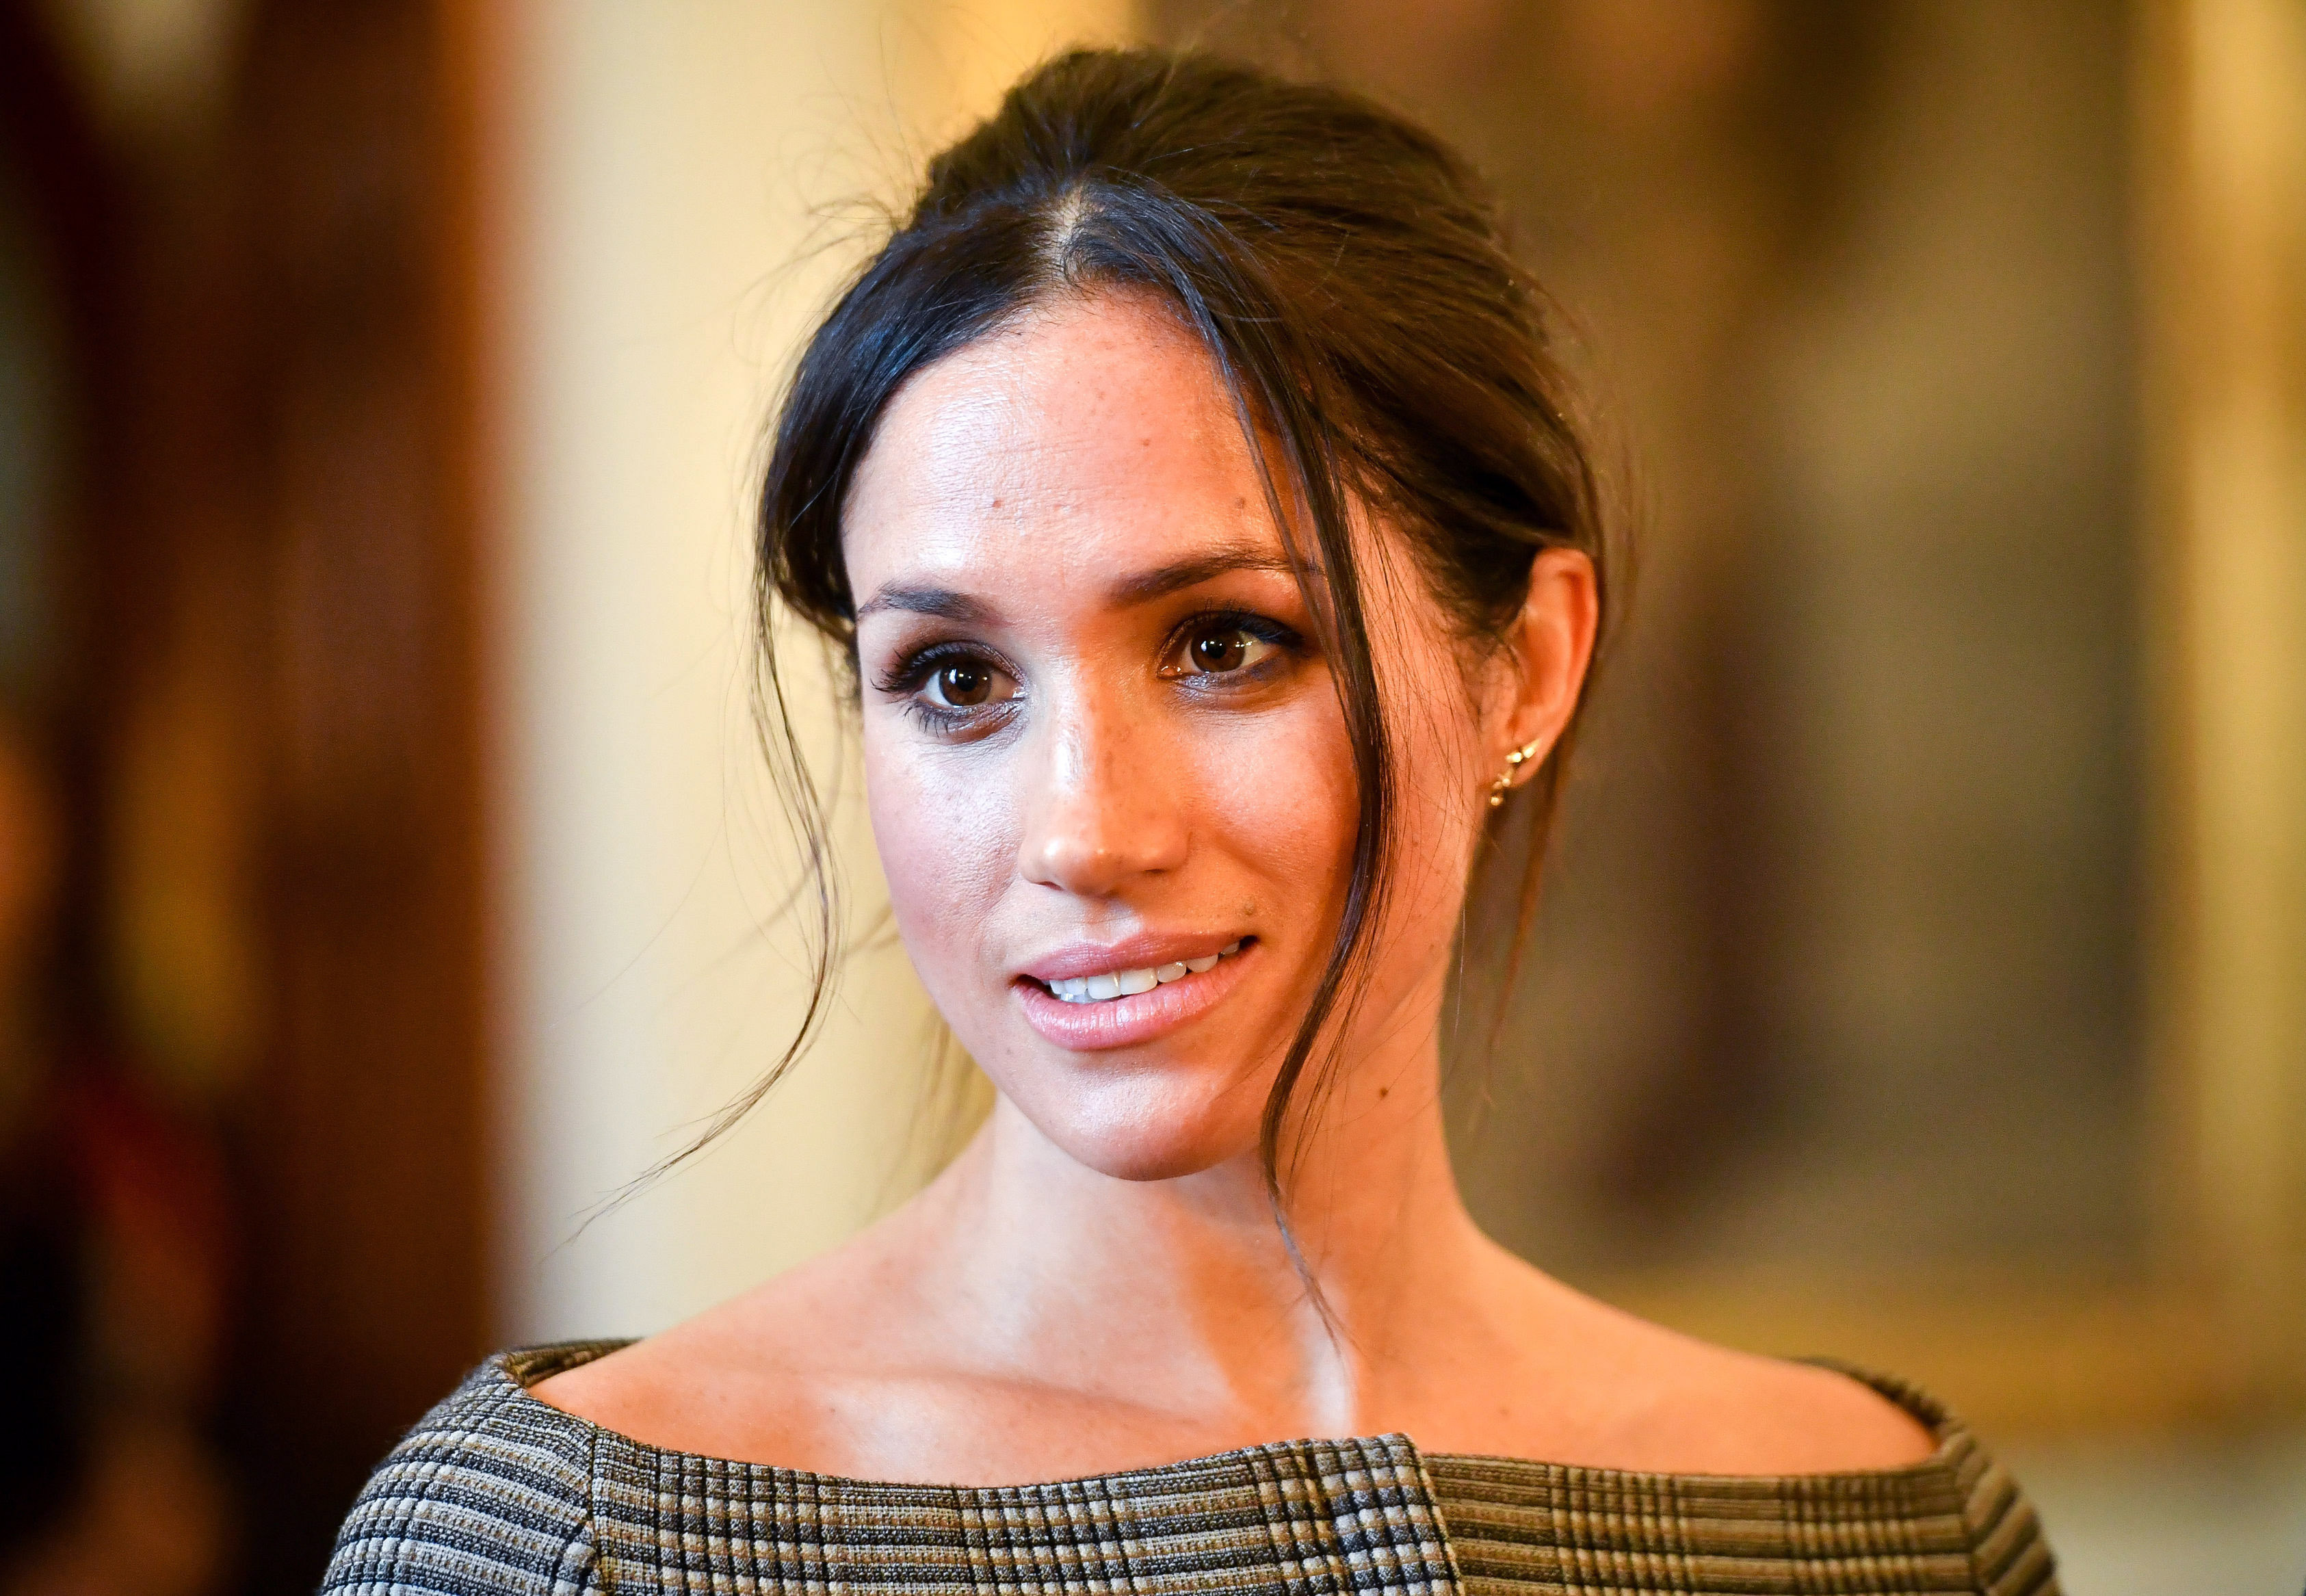 Meghan Markle’s Behavior ‘Totally Goes Against What She’s Saying’ Says Body Language Expert: ‘She’s Absolutely Eating It Up’